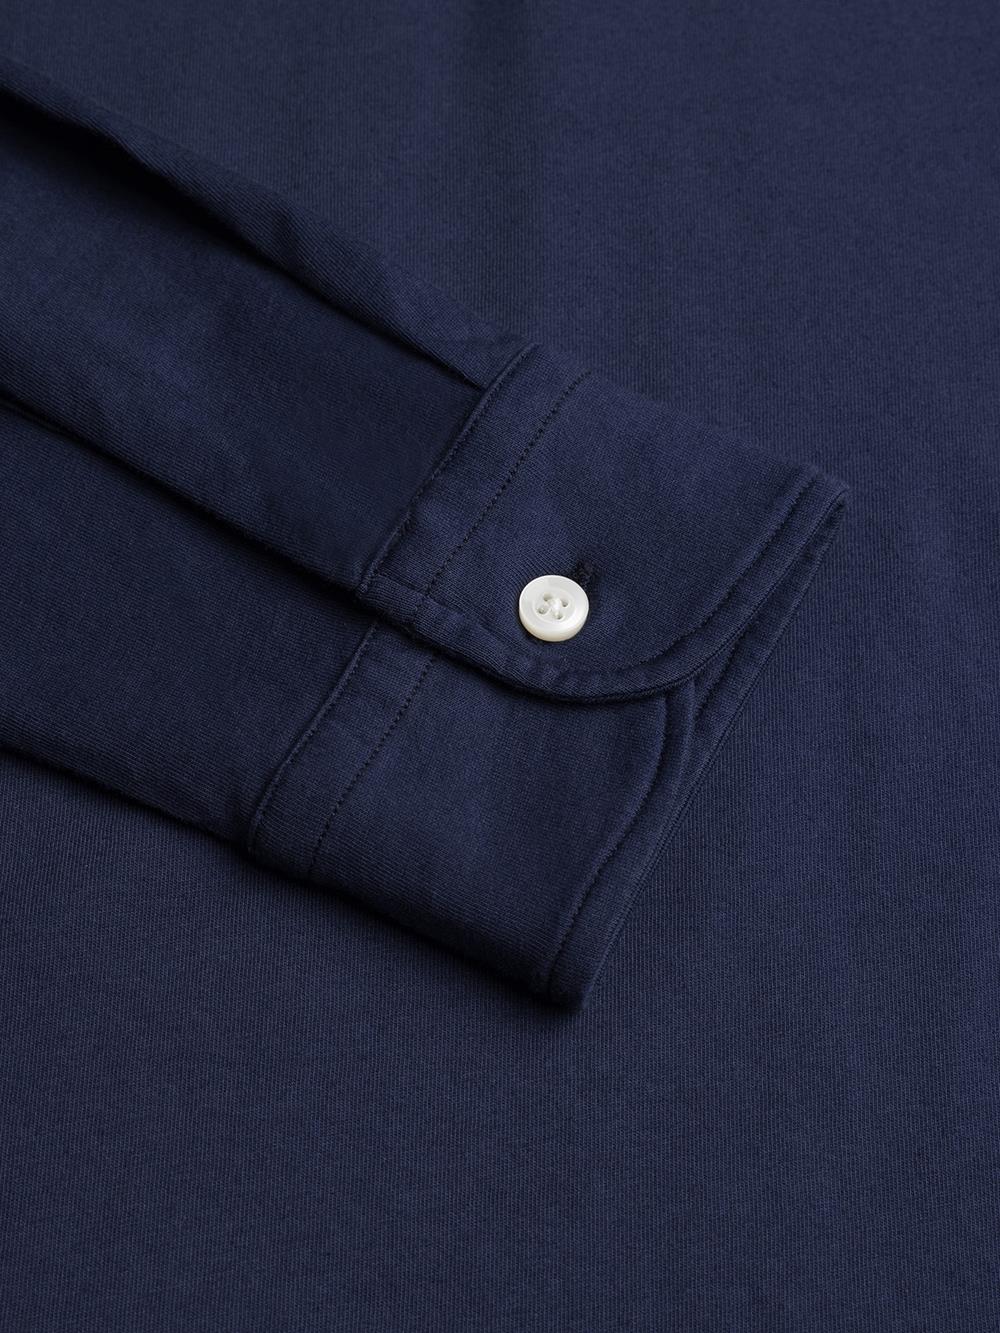 Bred long sleeve polo in navy jersey